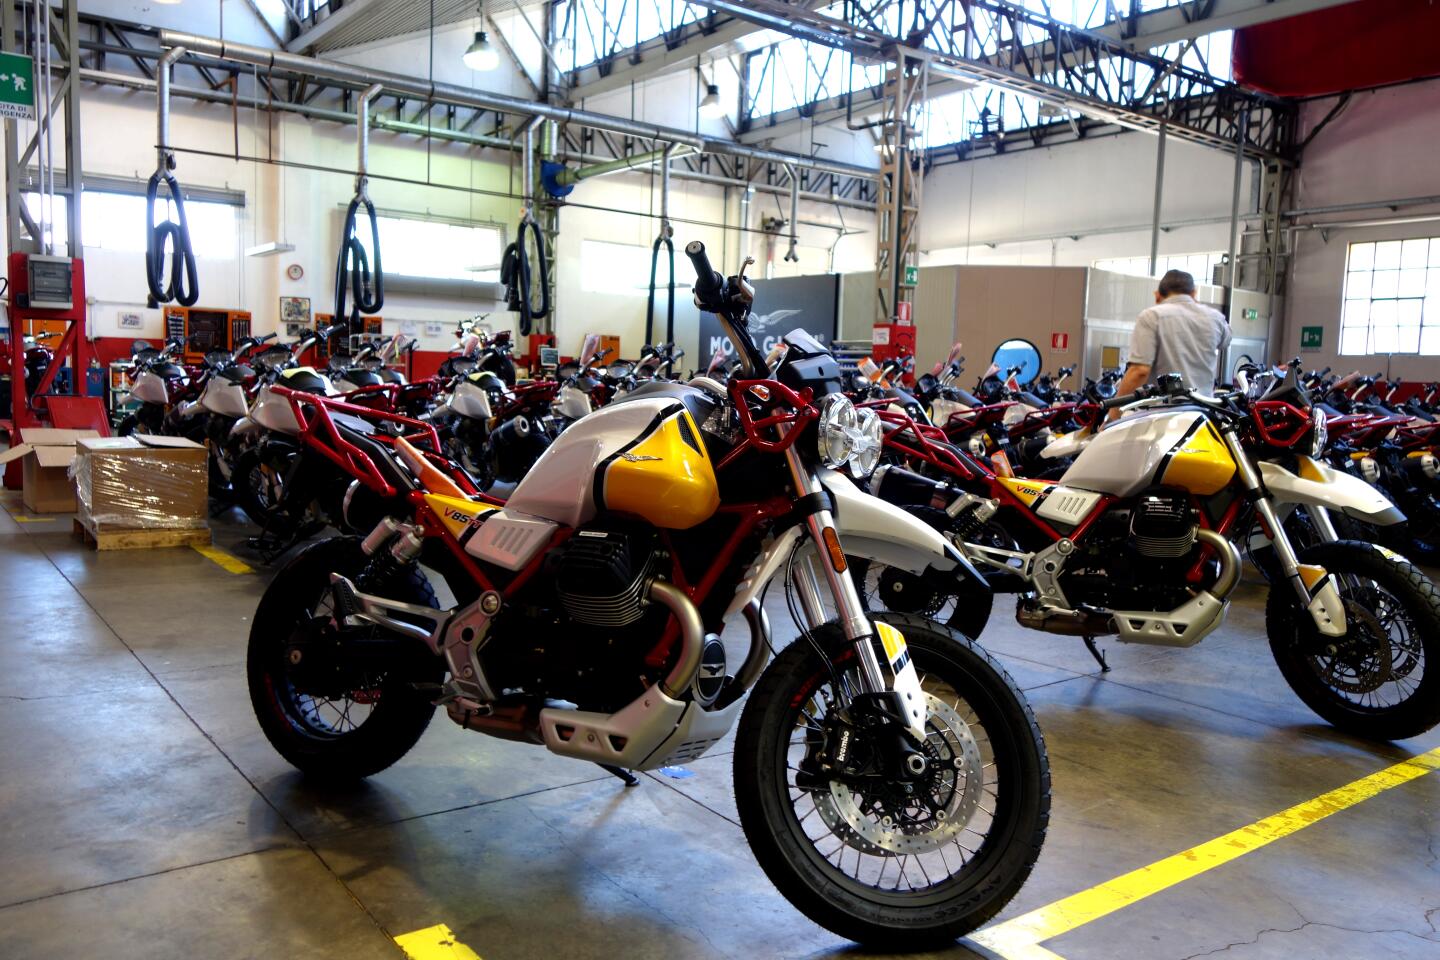 A pair of Moto Guzzi V85 TT motorcycles are seen in the foreground at the factory in Mandello Del Lario, Italy.